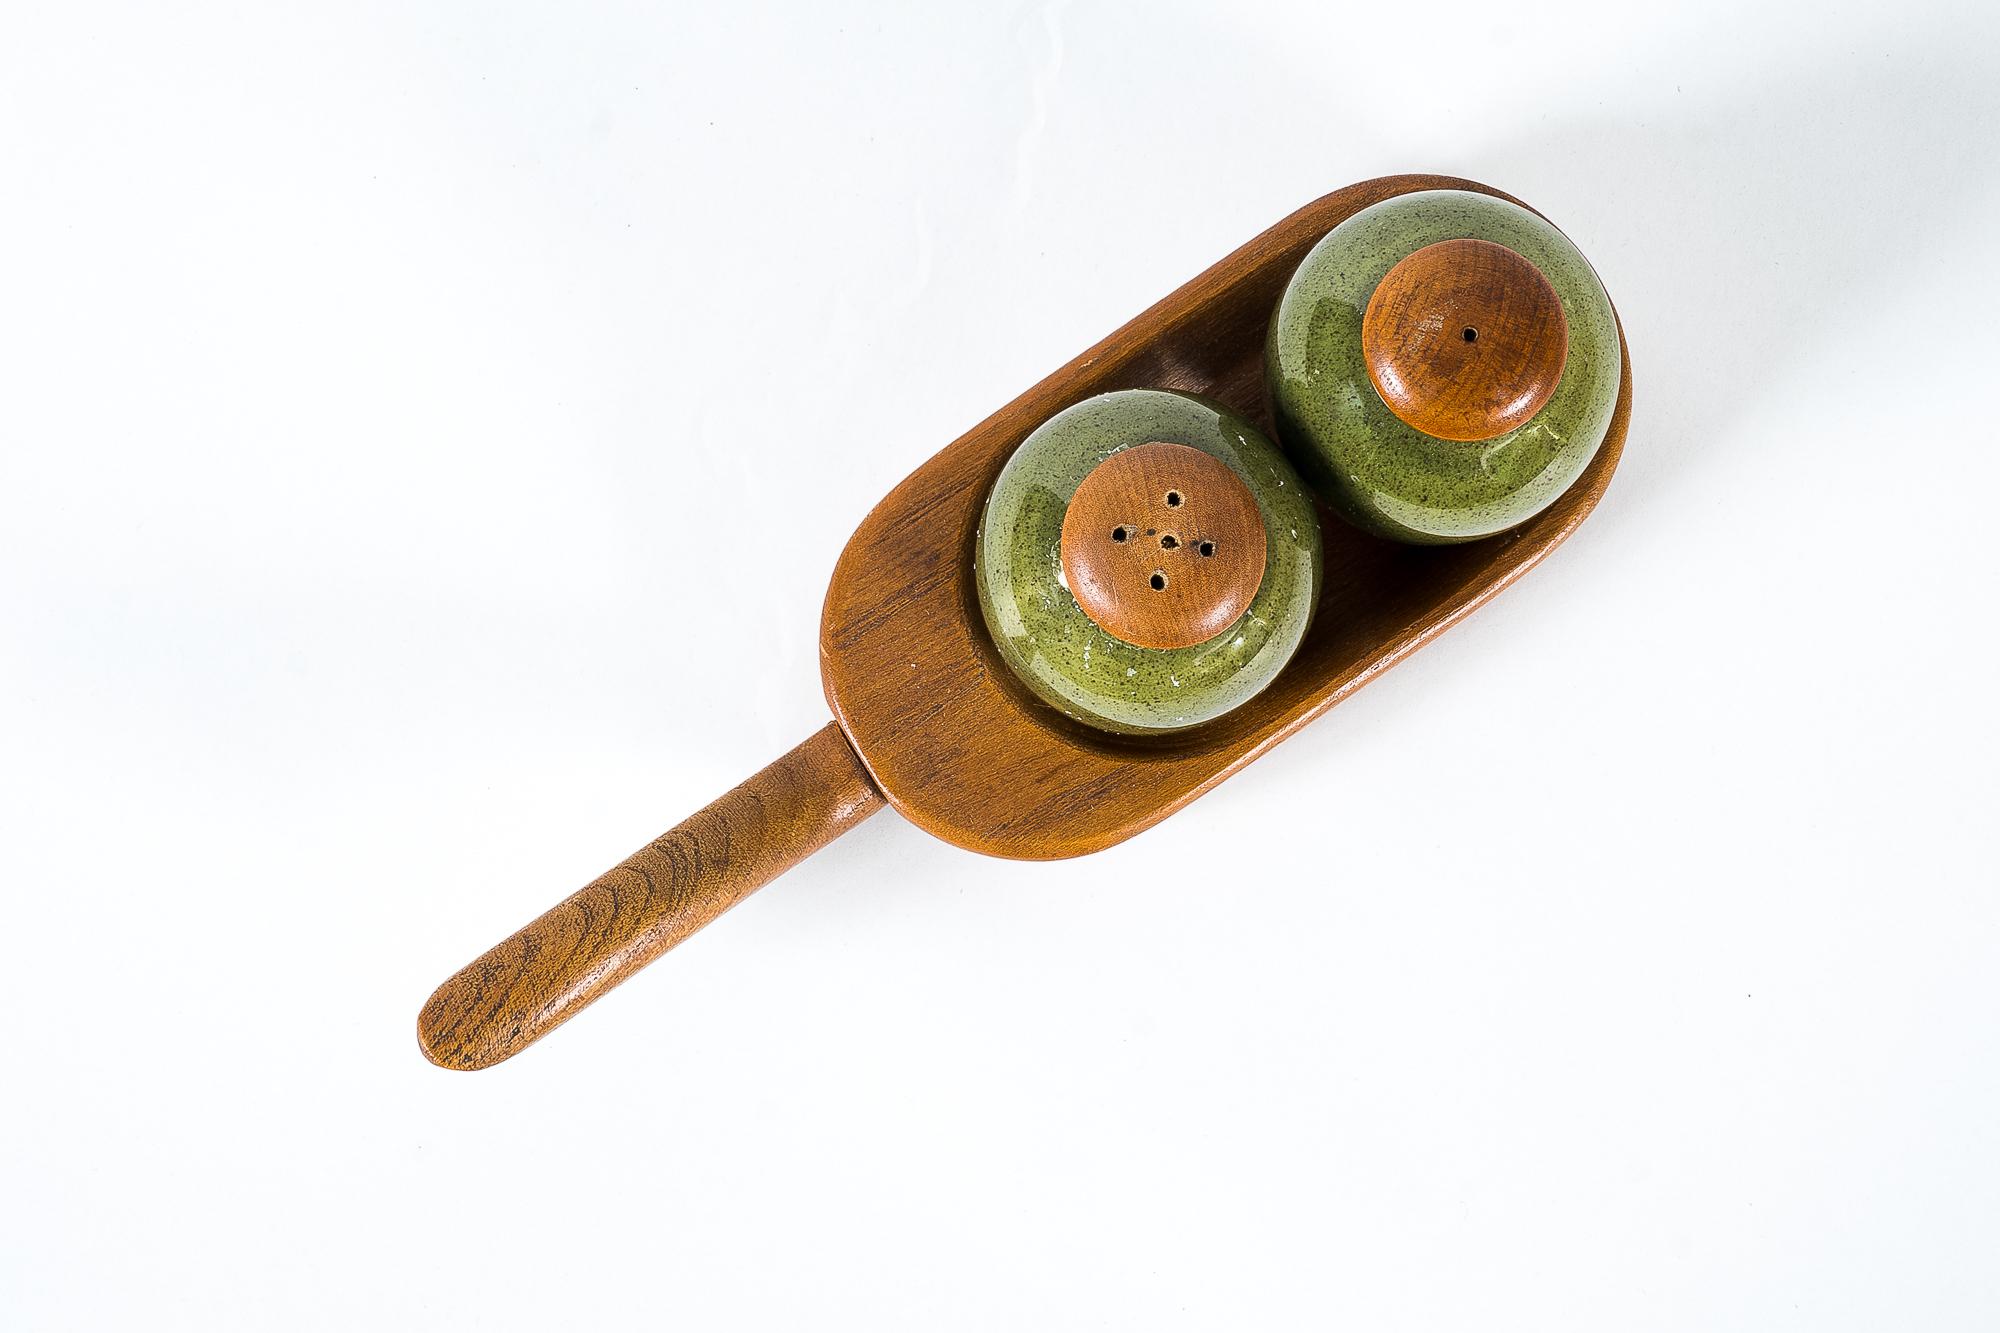 Salt and Pepper Shaker with Stand in Teakwood and Ceramic, Around 1960s For Sale 4